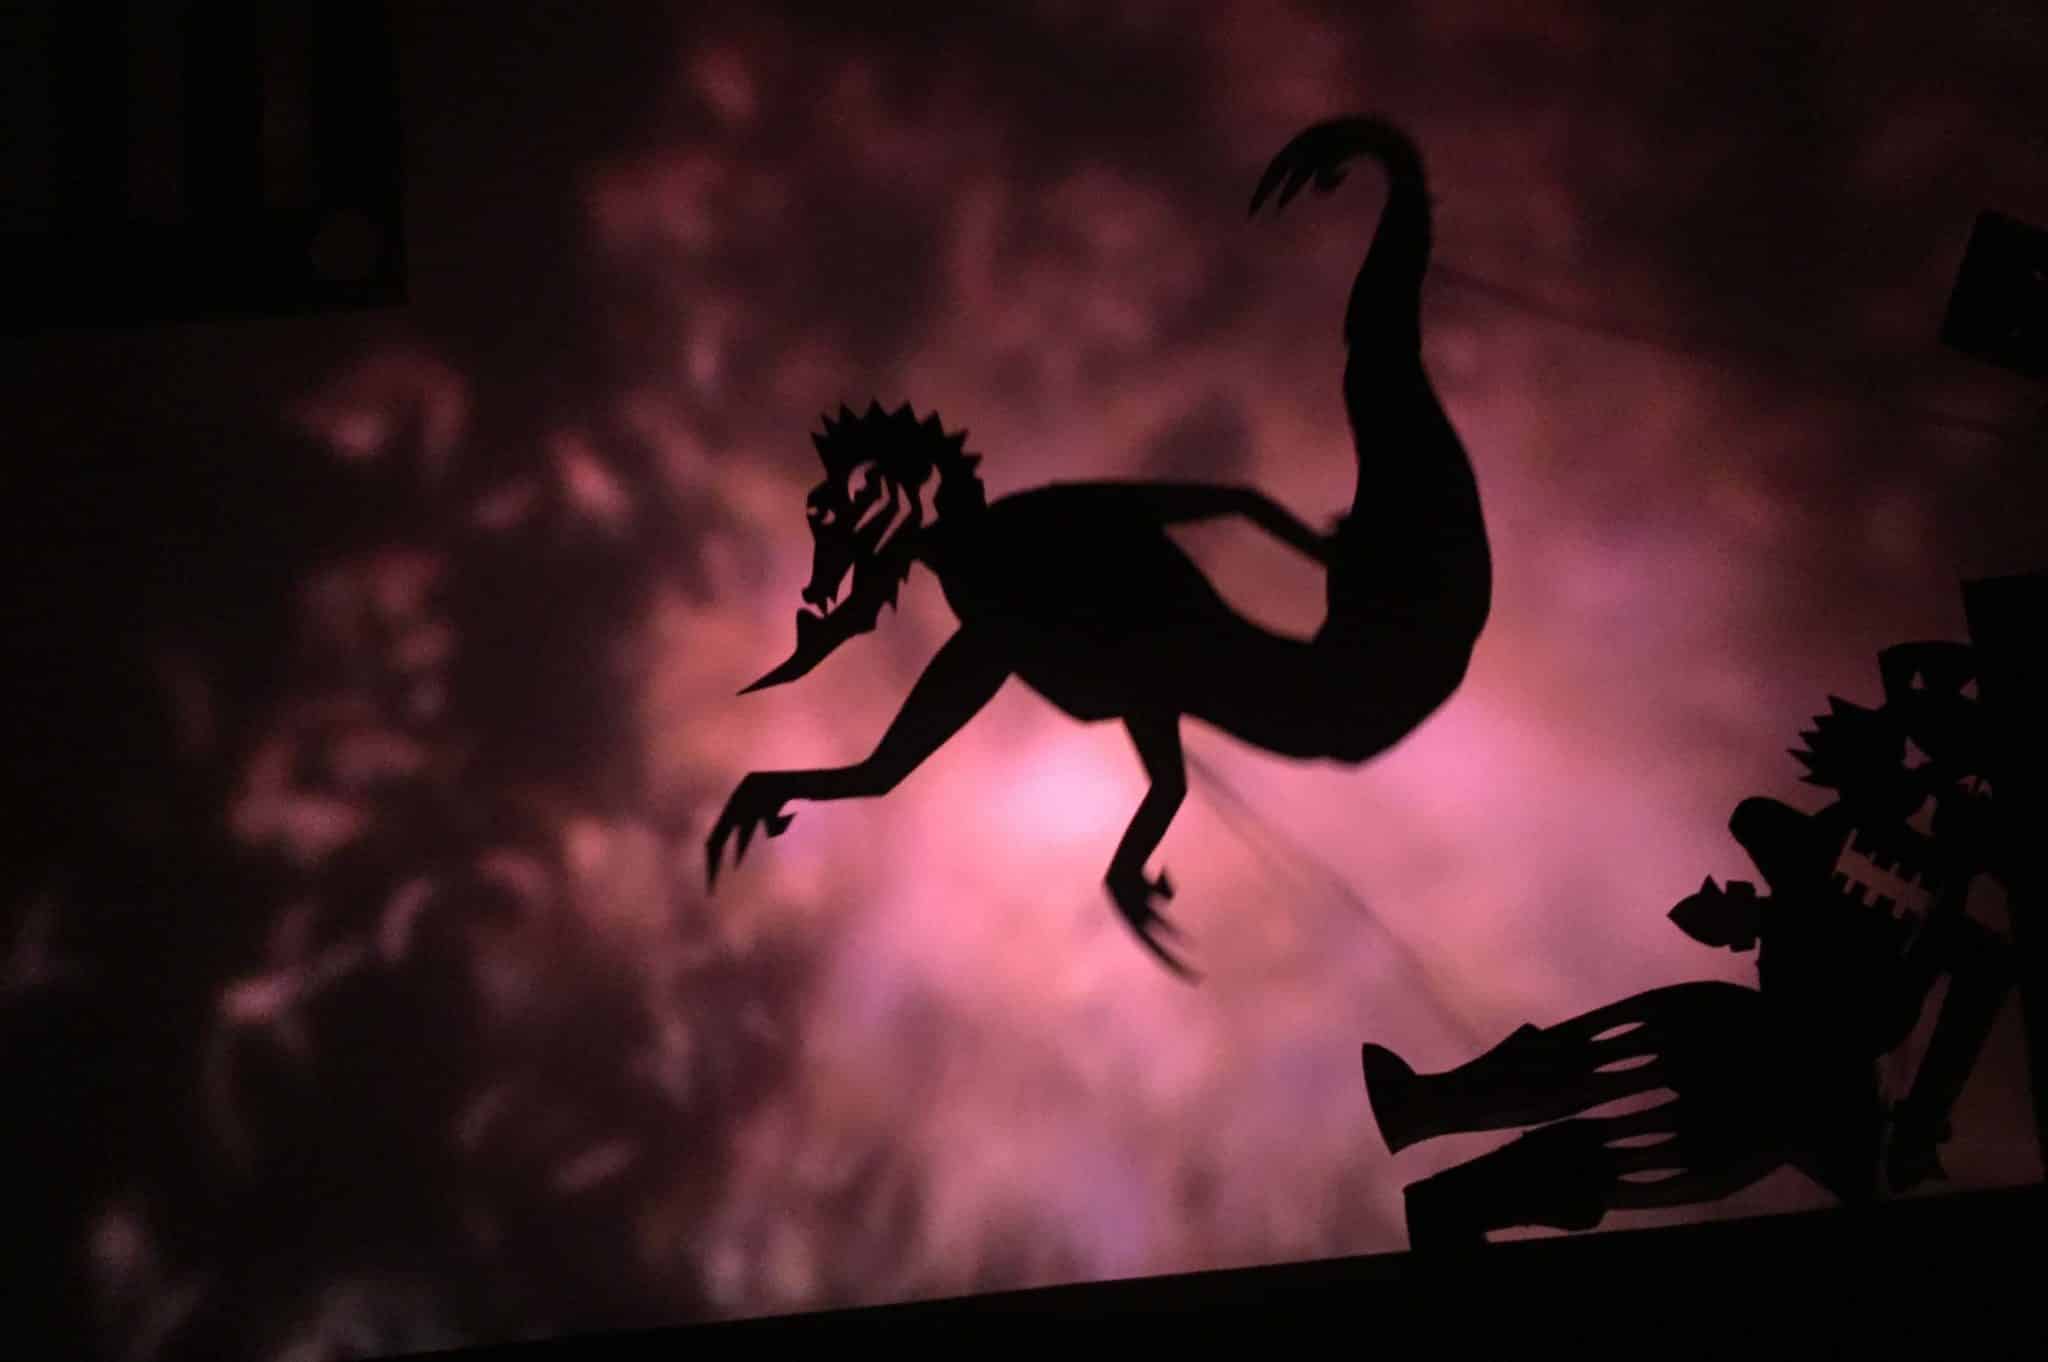 A mischevious shadow puppet character in front of an abstract background